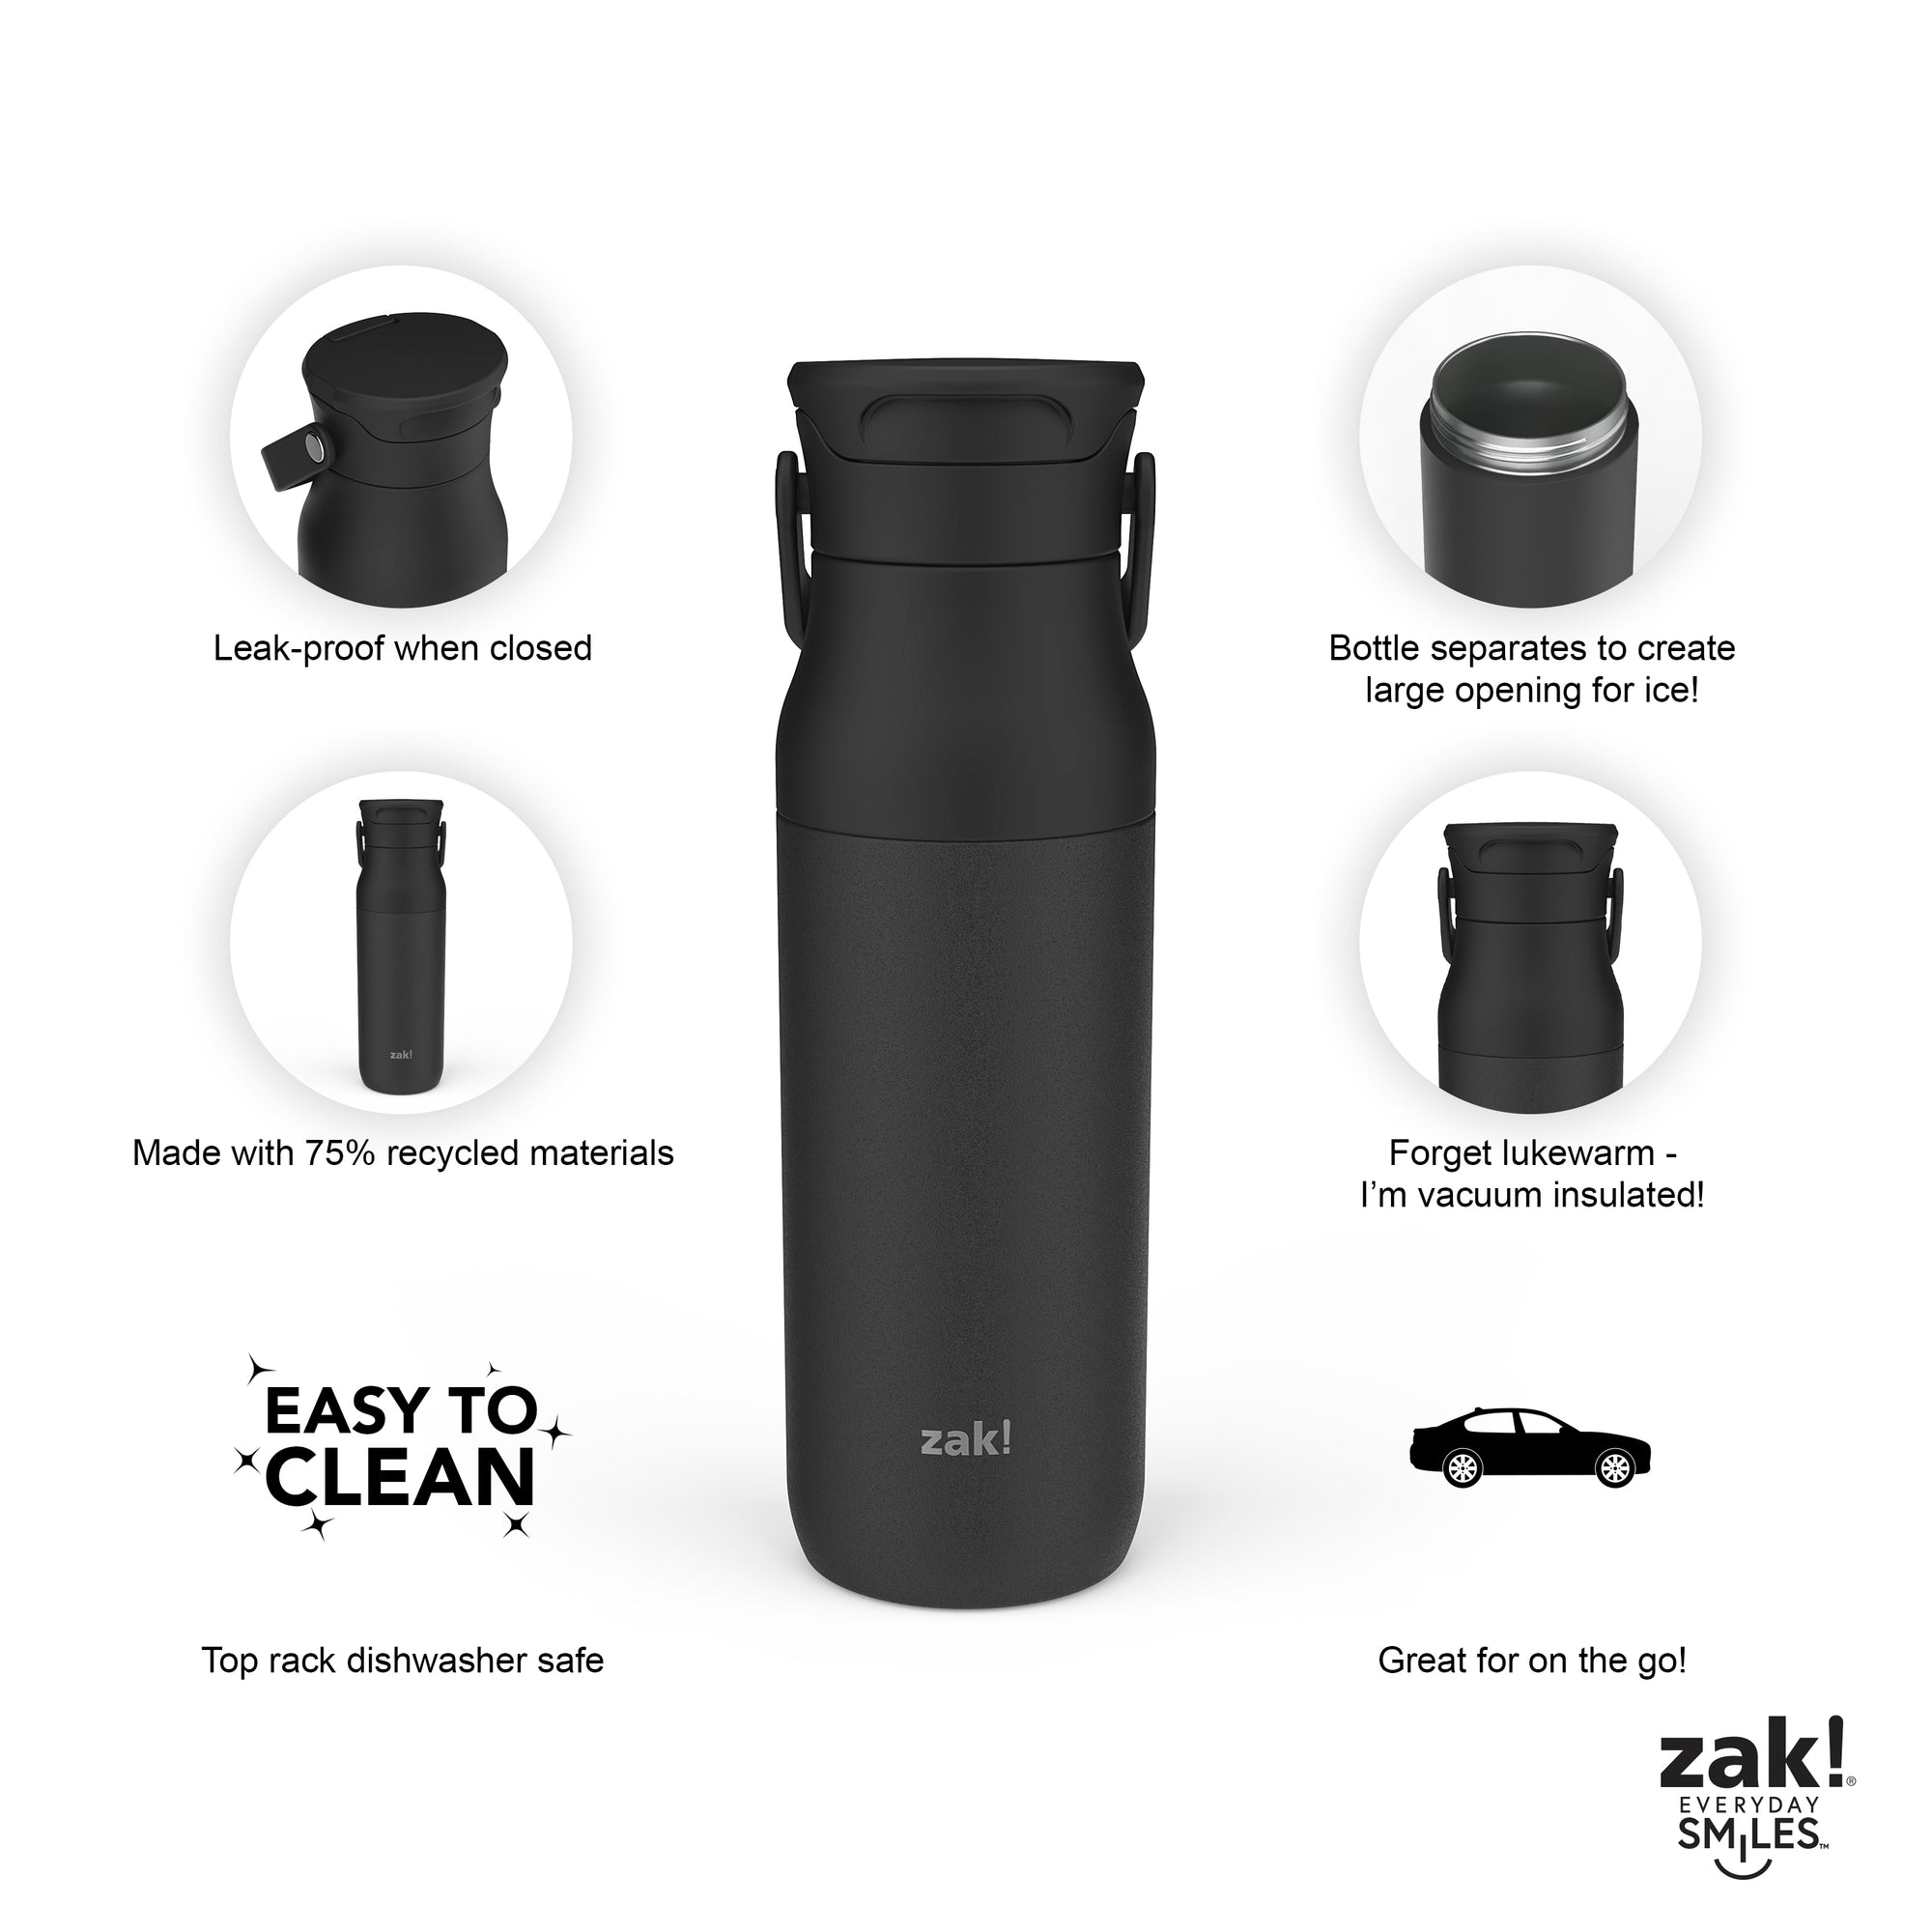 Harmony Recycled Stainless Steel Insulated Water Bottle with Sip Opening - Ebony, 32 ounces